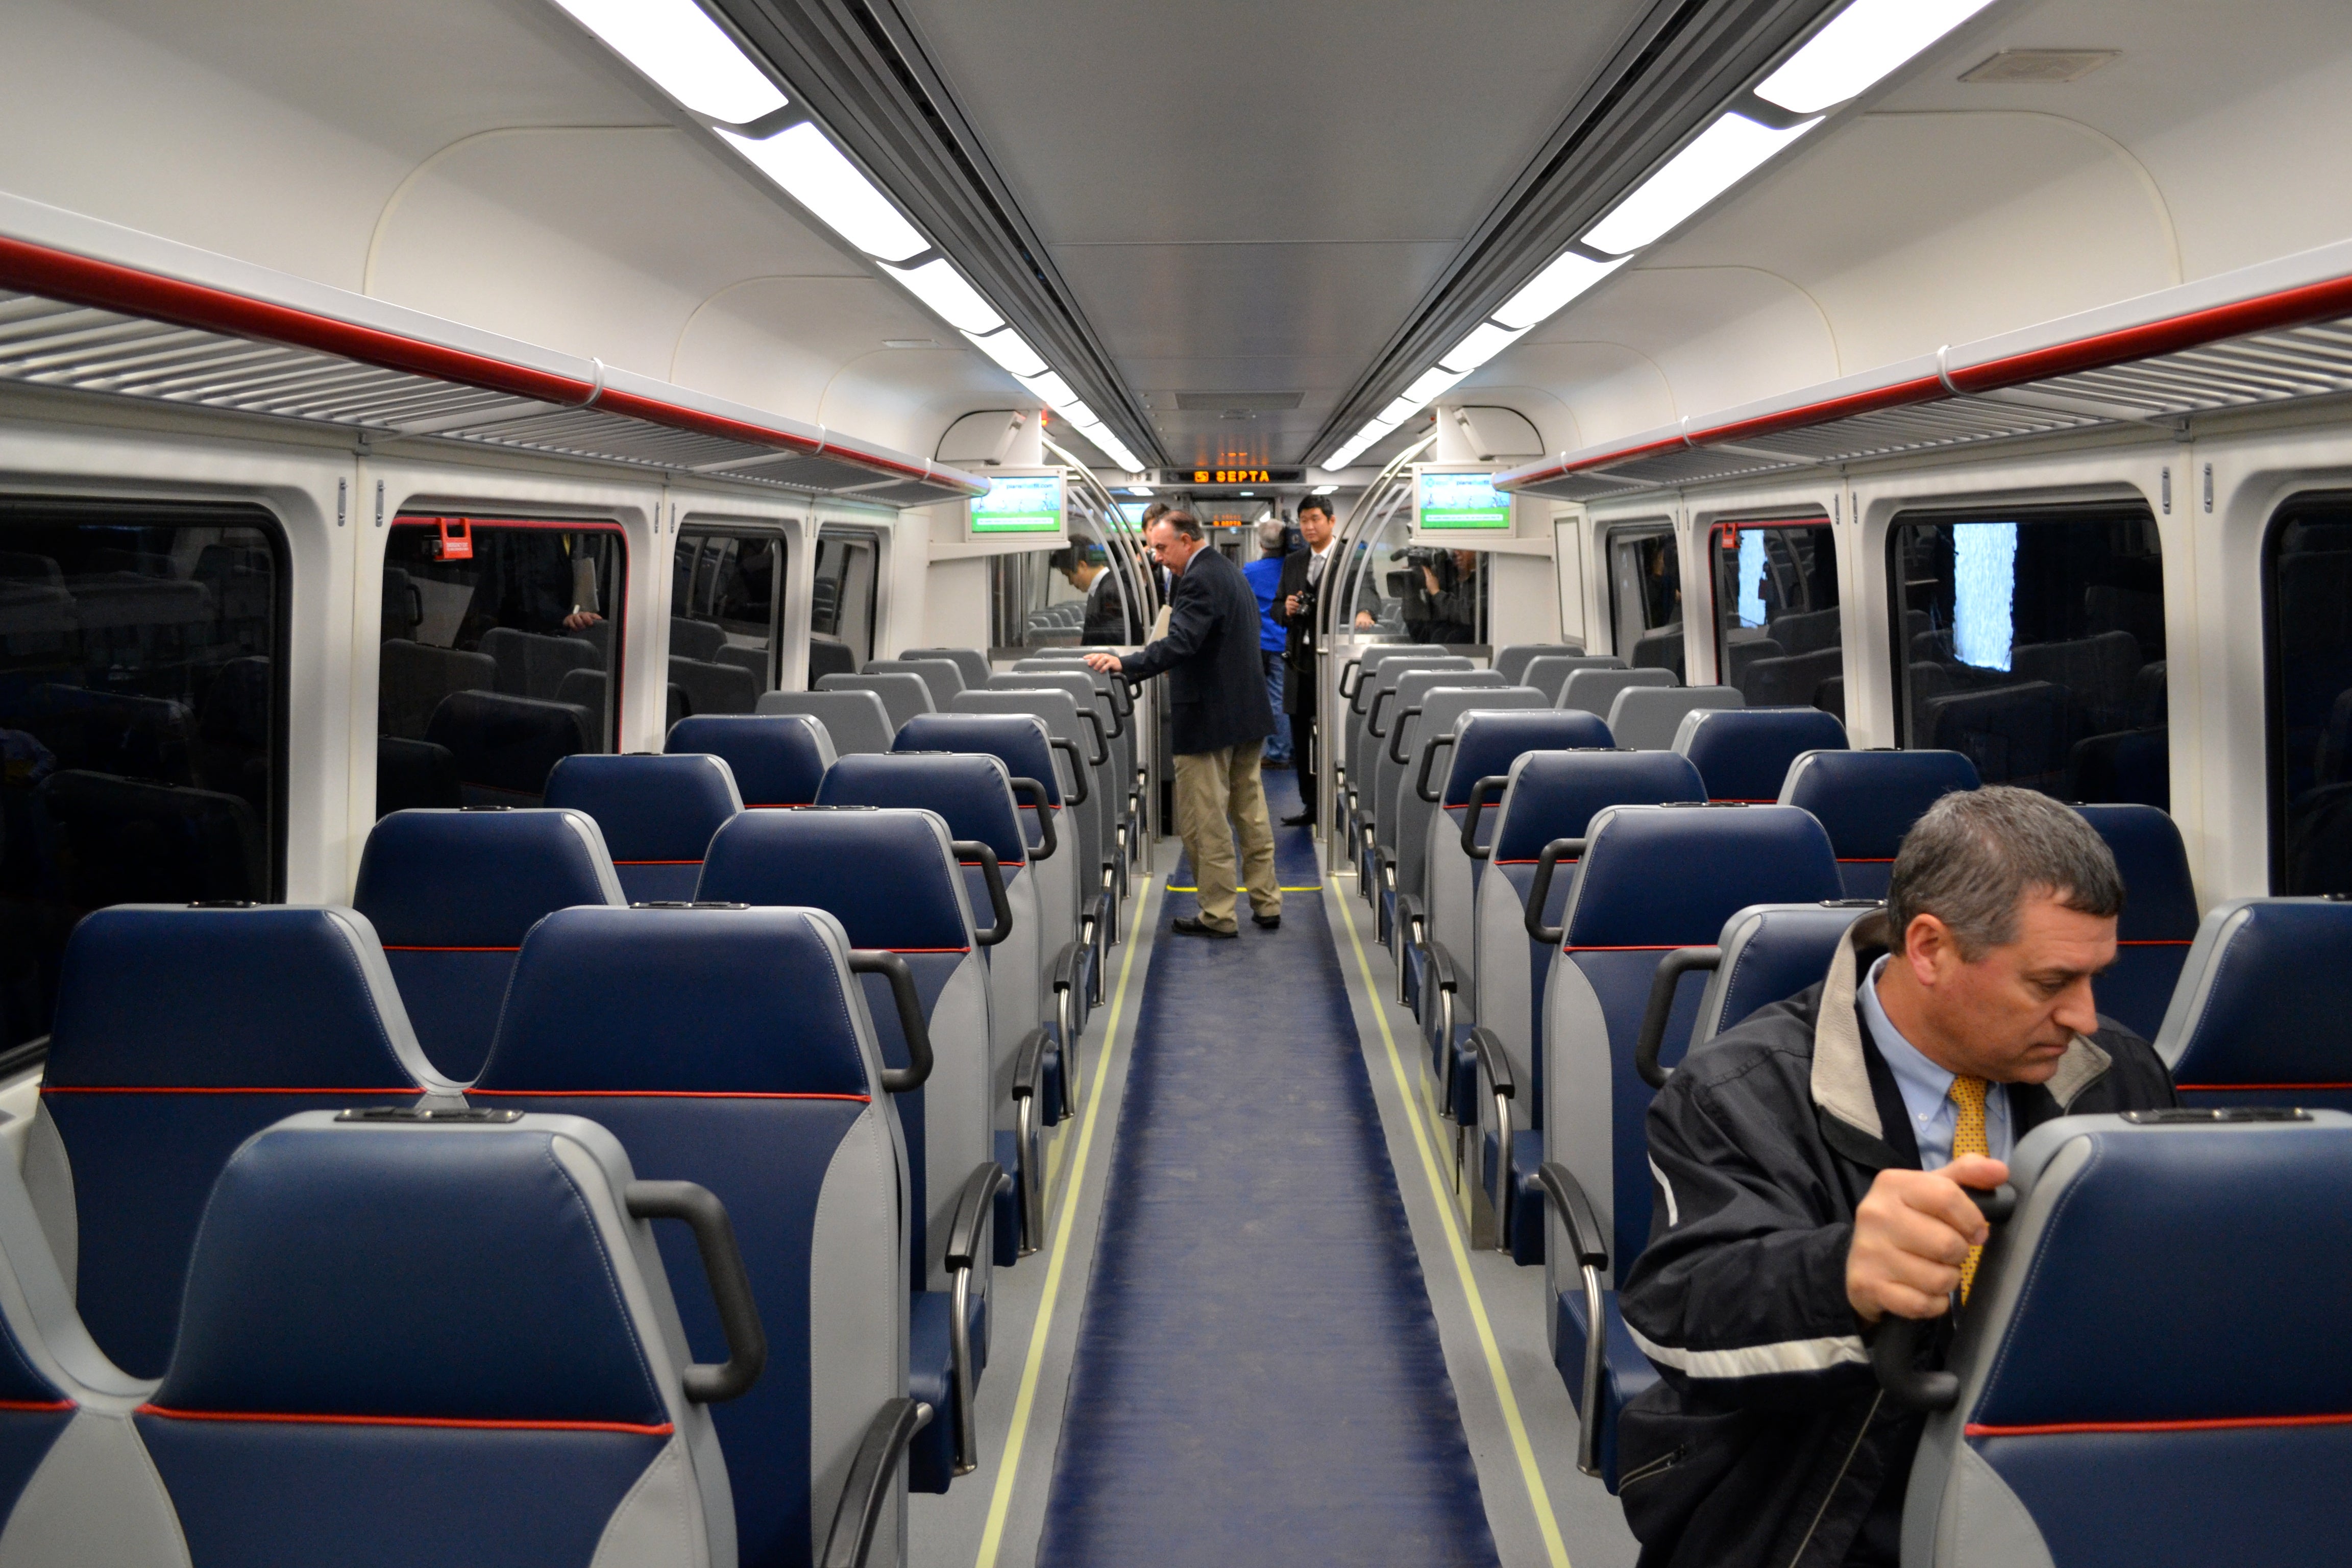 SEPTA said the Silverliner V's improved passenger amenities have received rave reviews